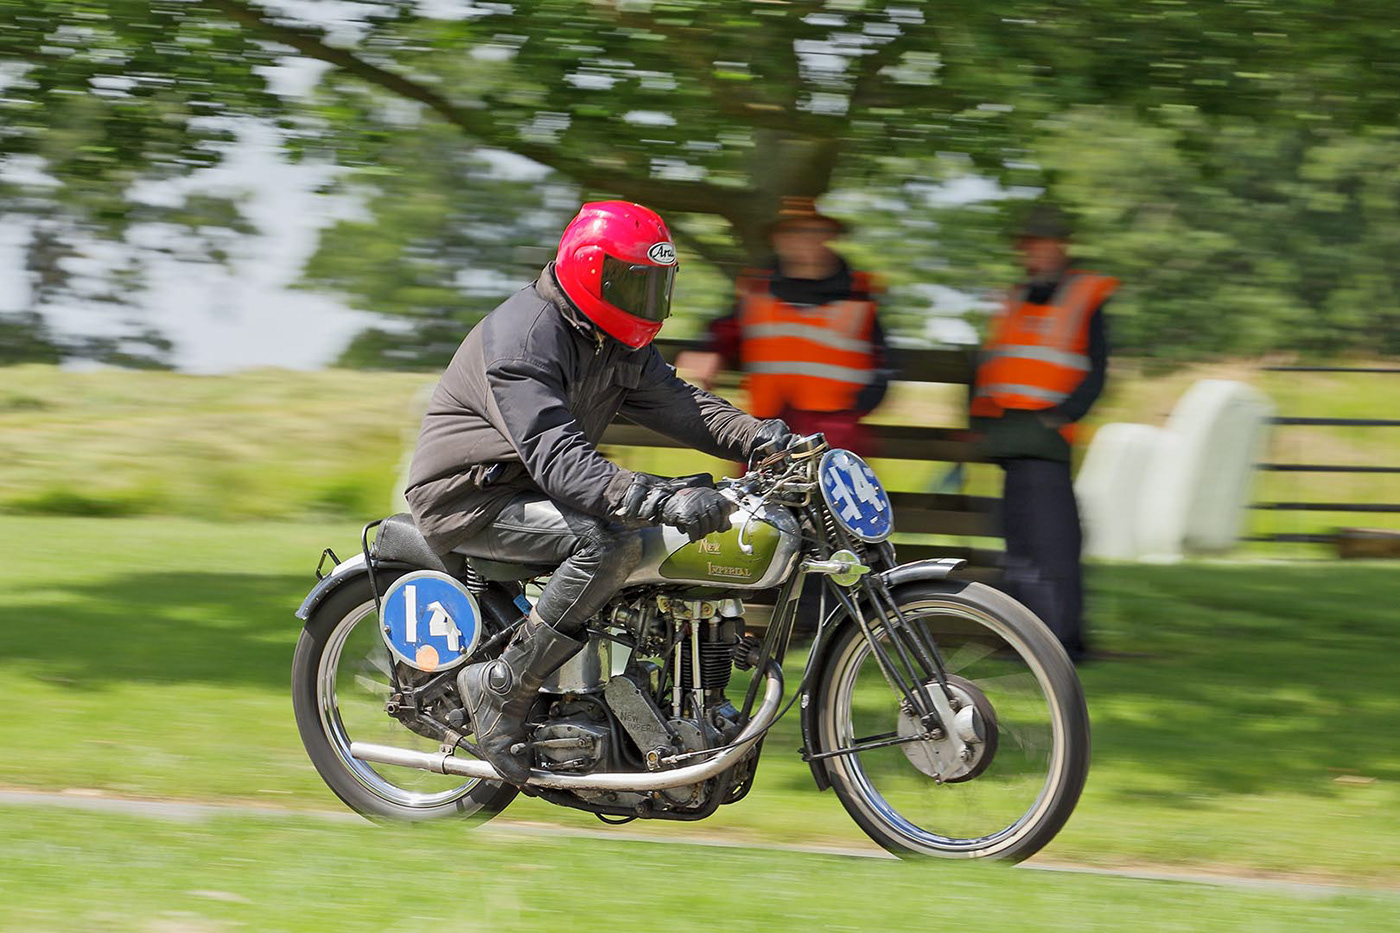 Aske Hall Brian Chapman Classic motorcycle sprint